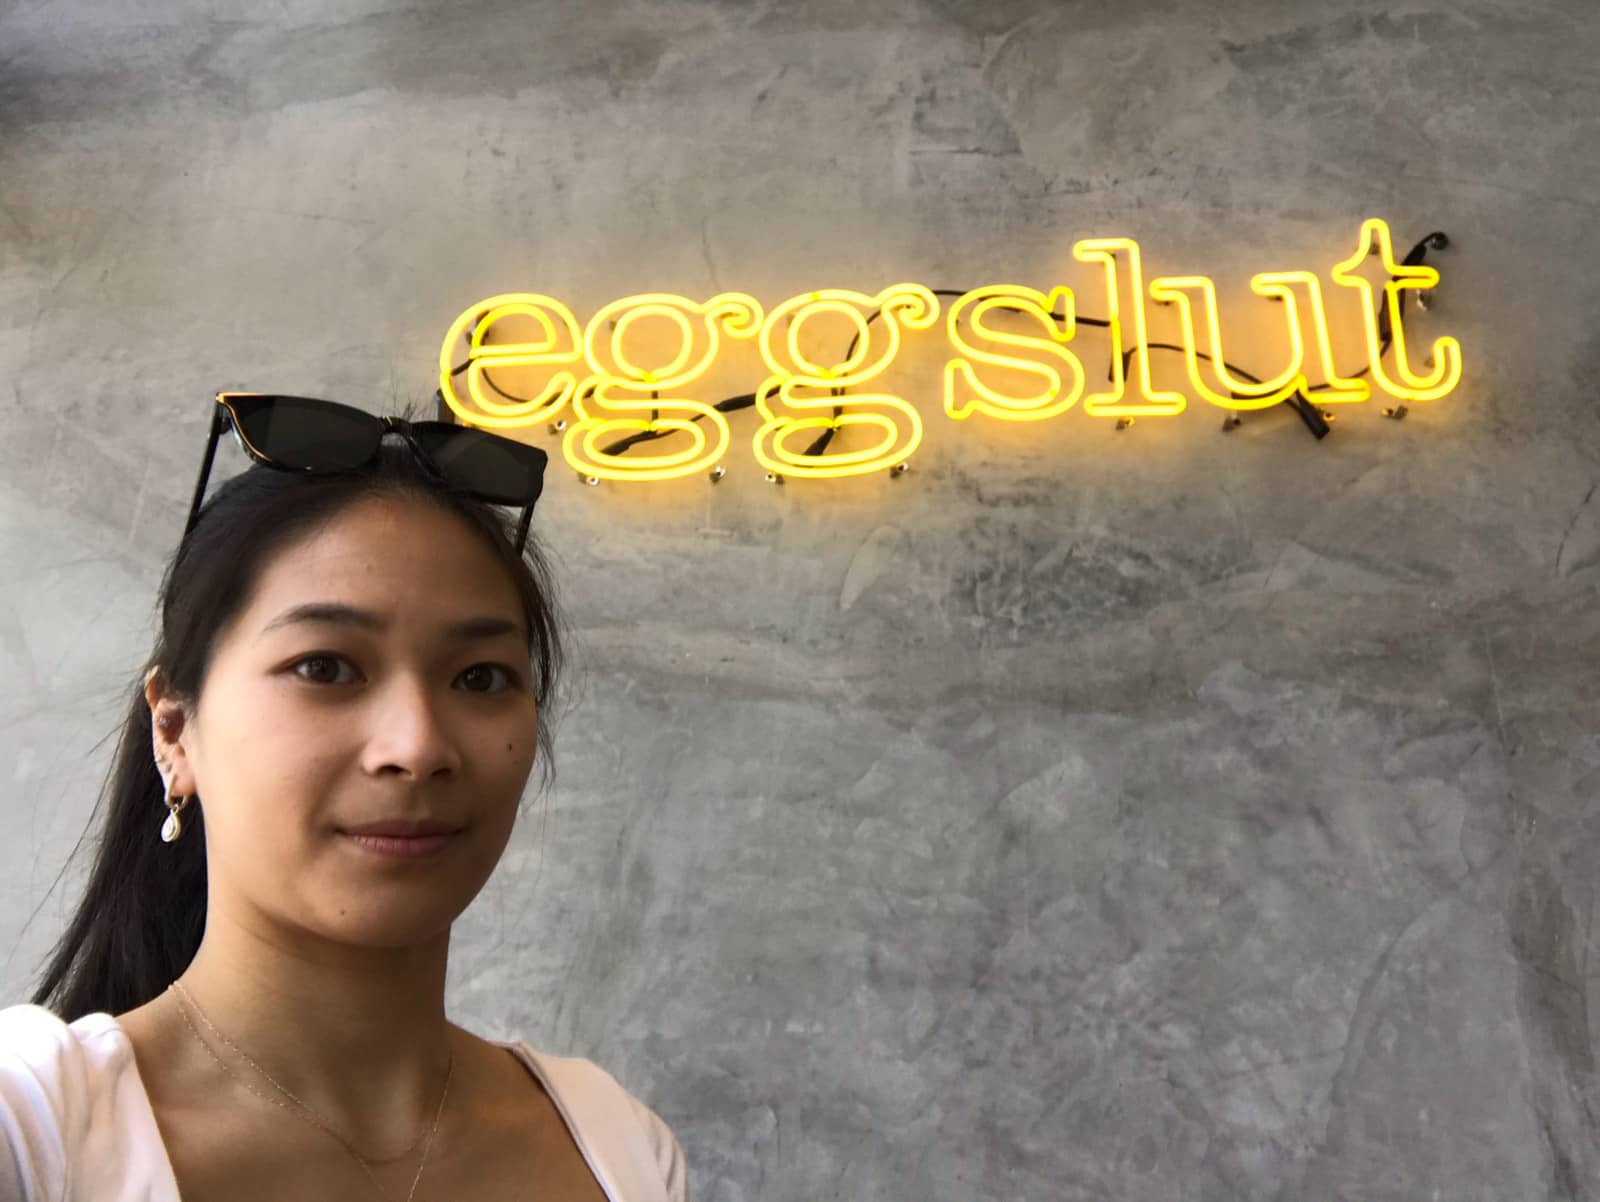 A woman with dark hair wearing sunglasses on top of her head, taking a selfie near a yellow neon sign on a grey wall that reads “eggslut”